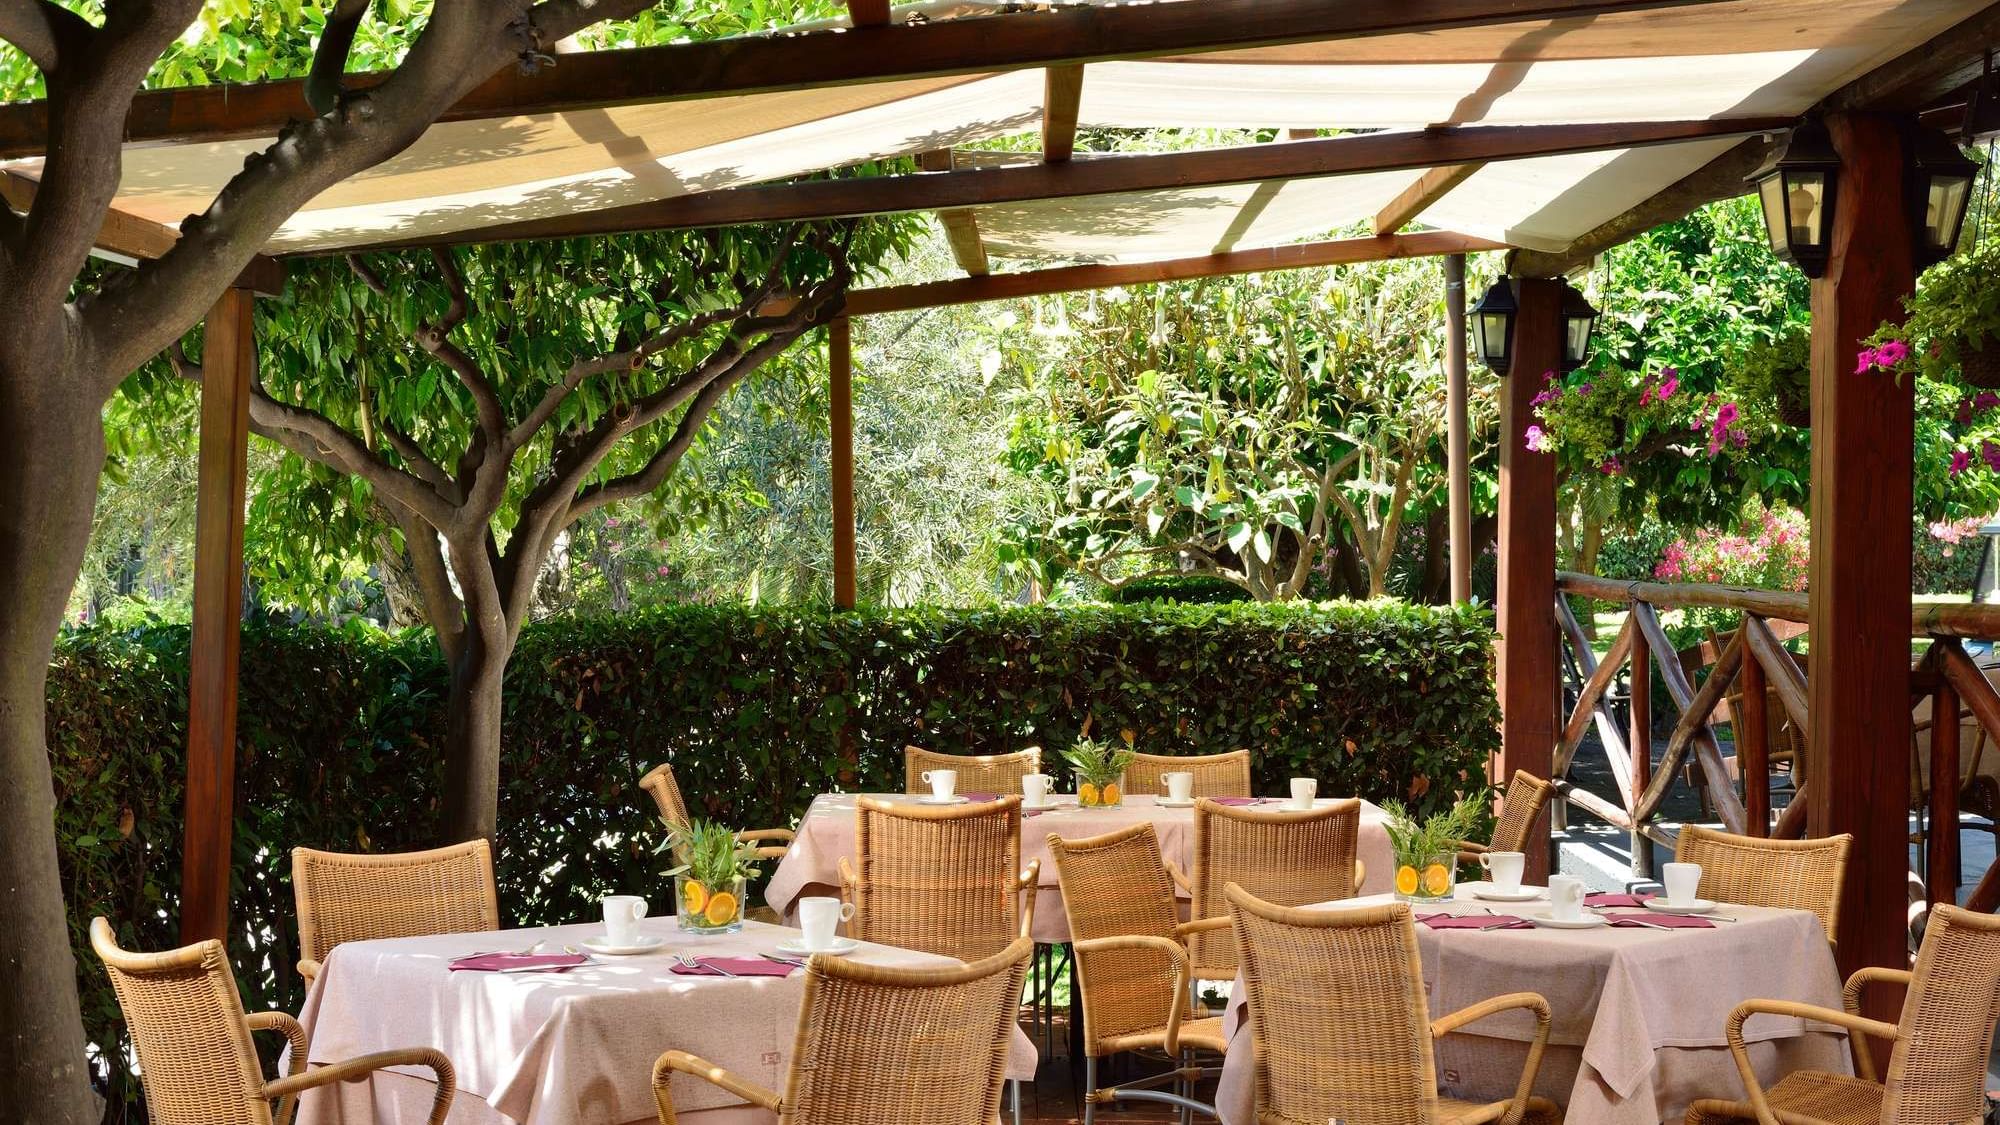 Restaurant within an ancient villa with an elegant patio